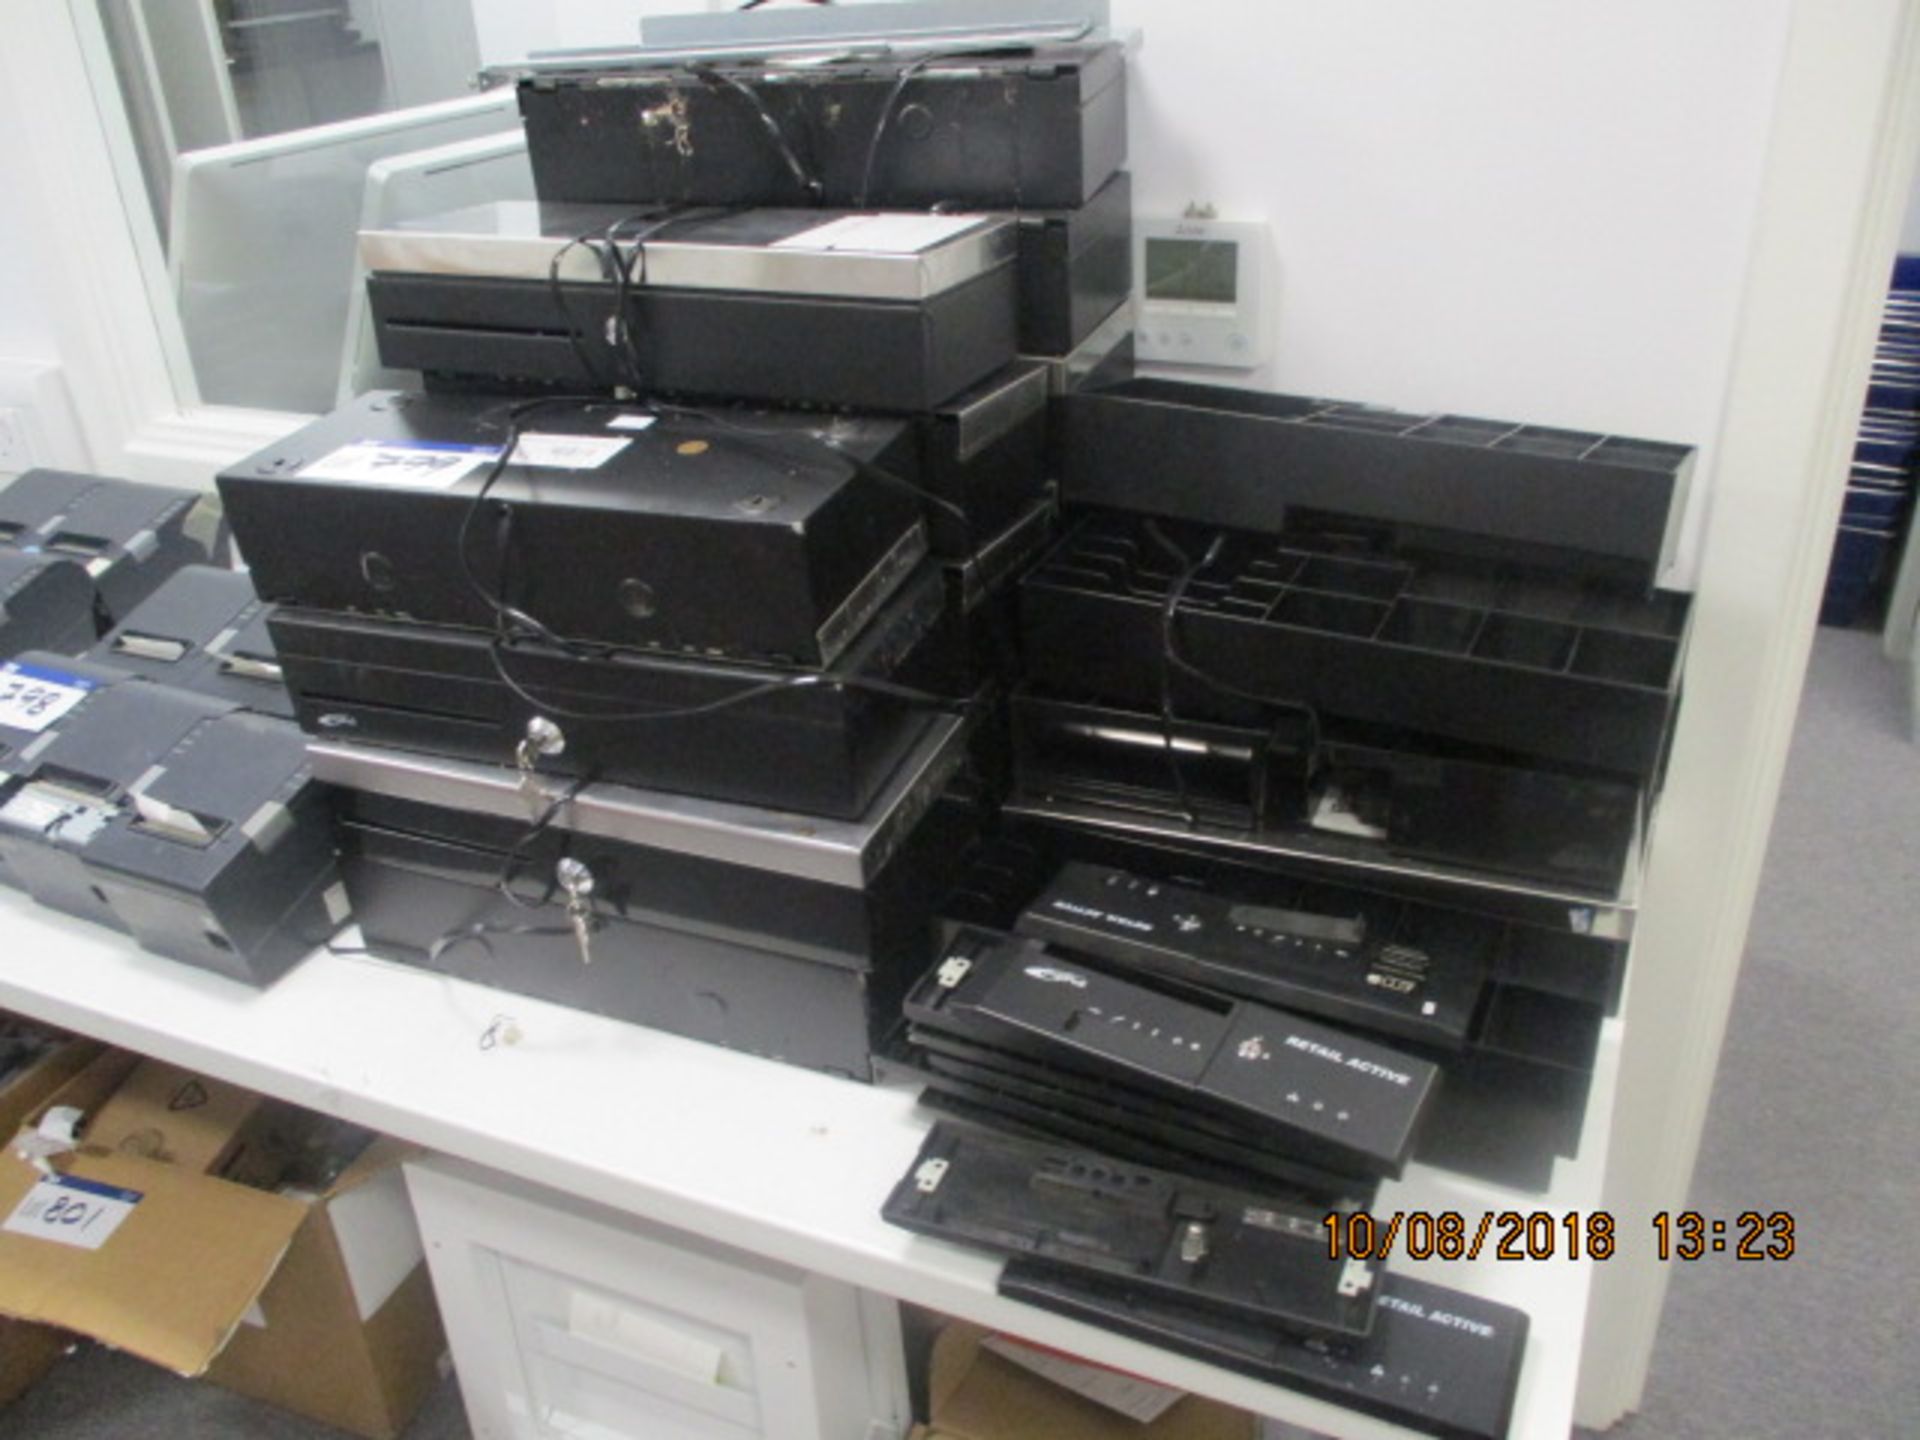 Quantity of Metapace Cash Drawers and Equipment